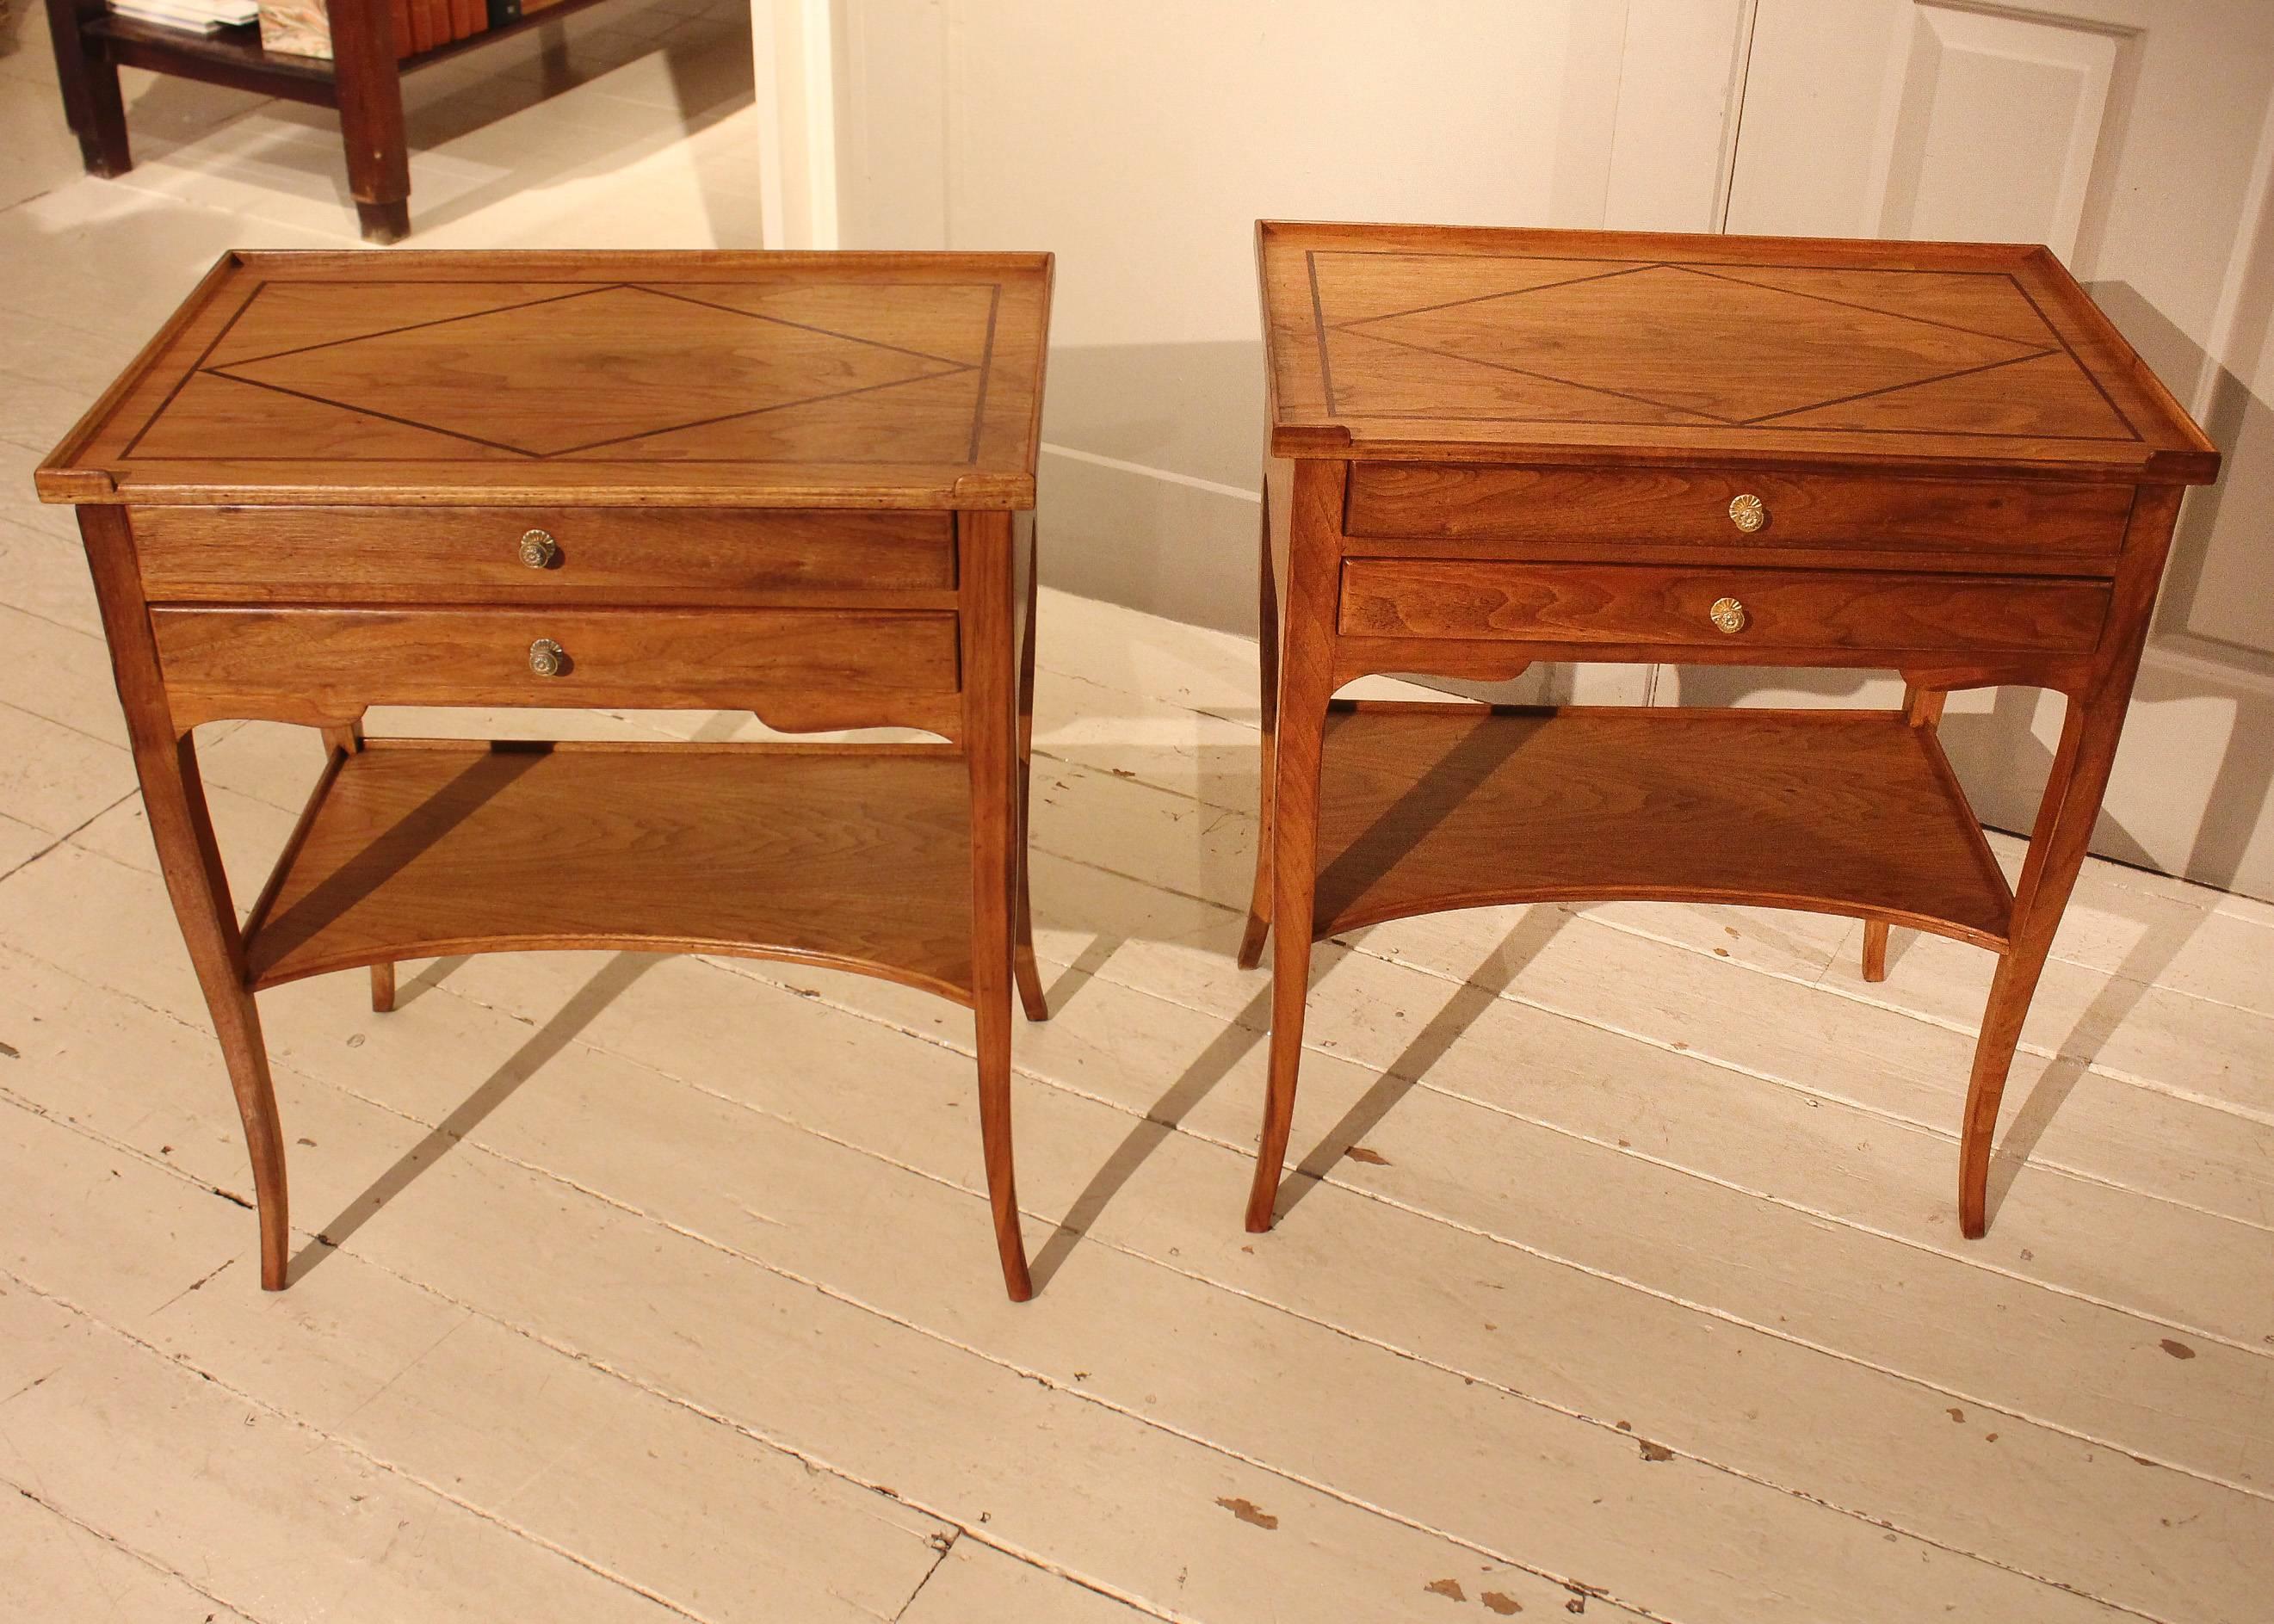 Pair of light walnut side tables, early 20th century France, with inlay galley top above two drawers and lower conclave-shaped shelf, raised on cabriole legs.